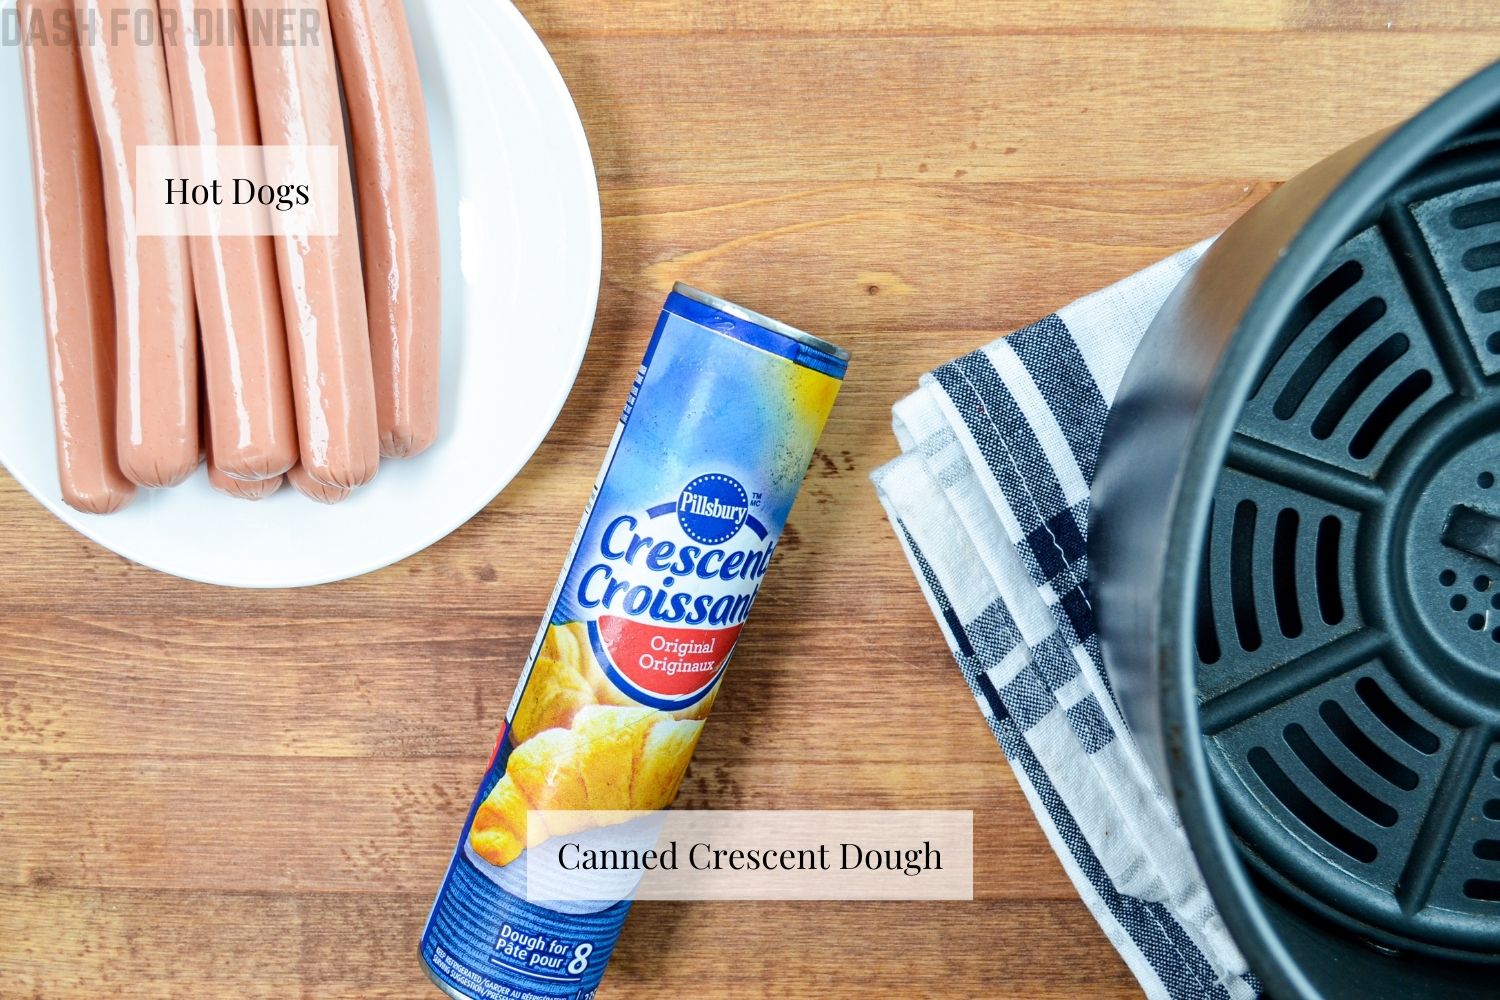 The ingredients needed to make air fryer pigs in a blanket: canned crescent dough and hot dogs.